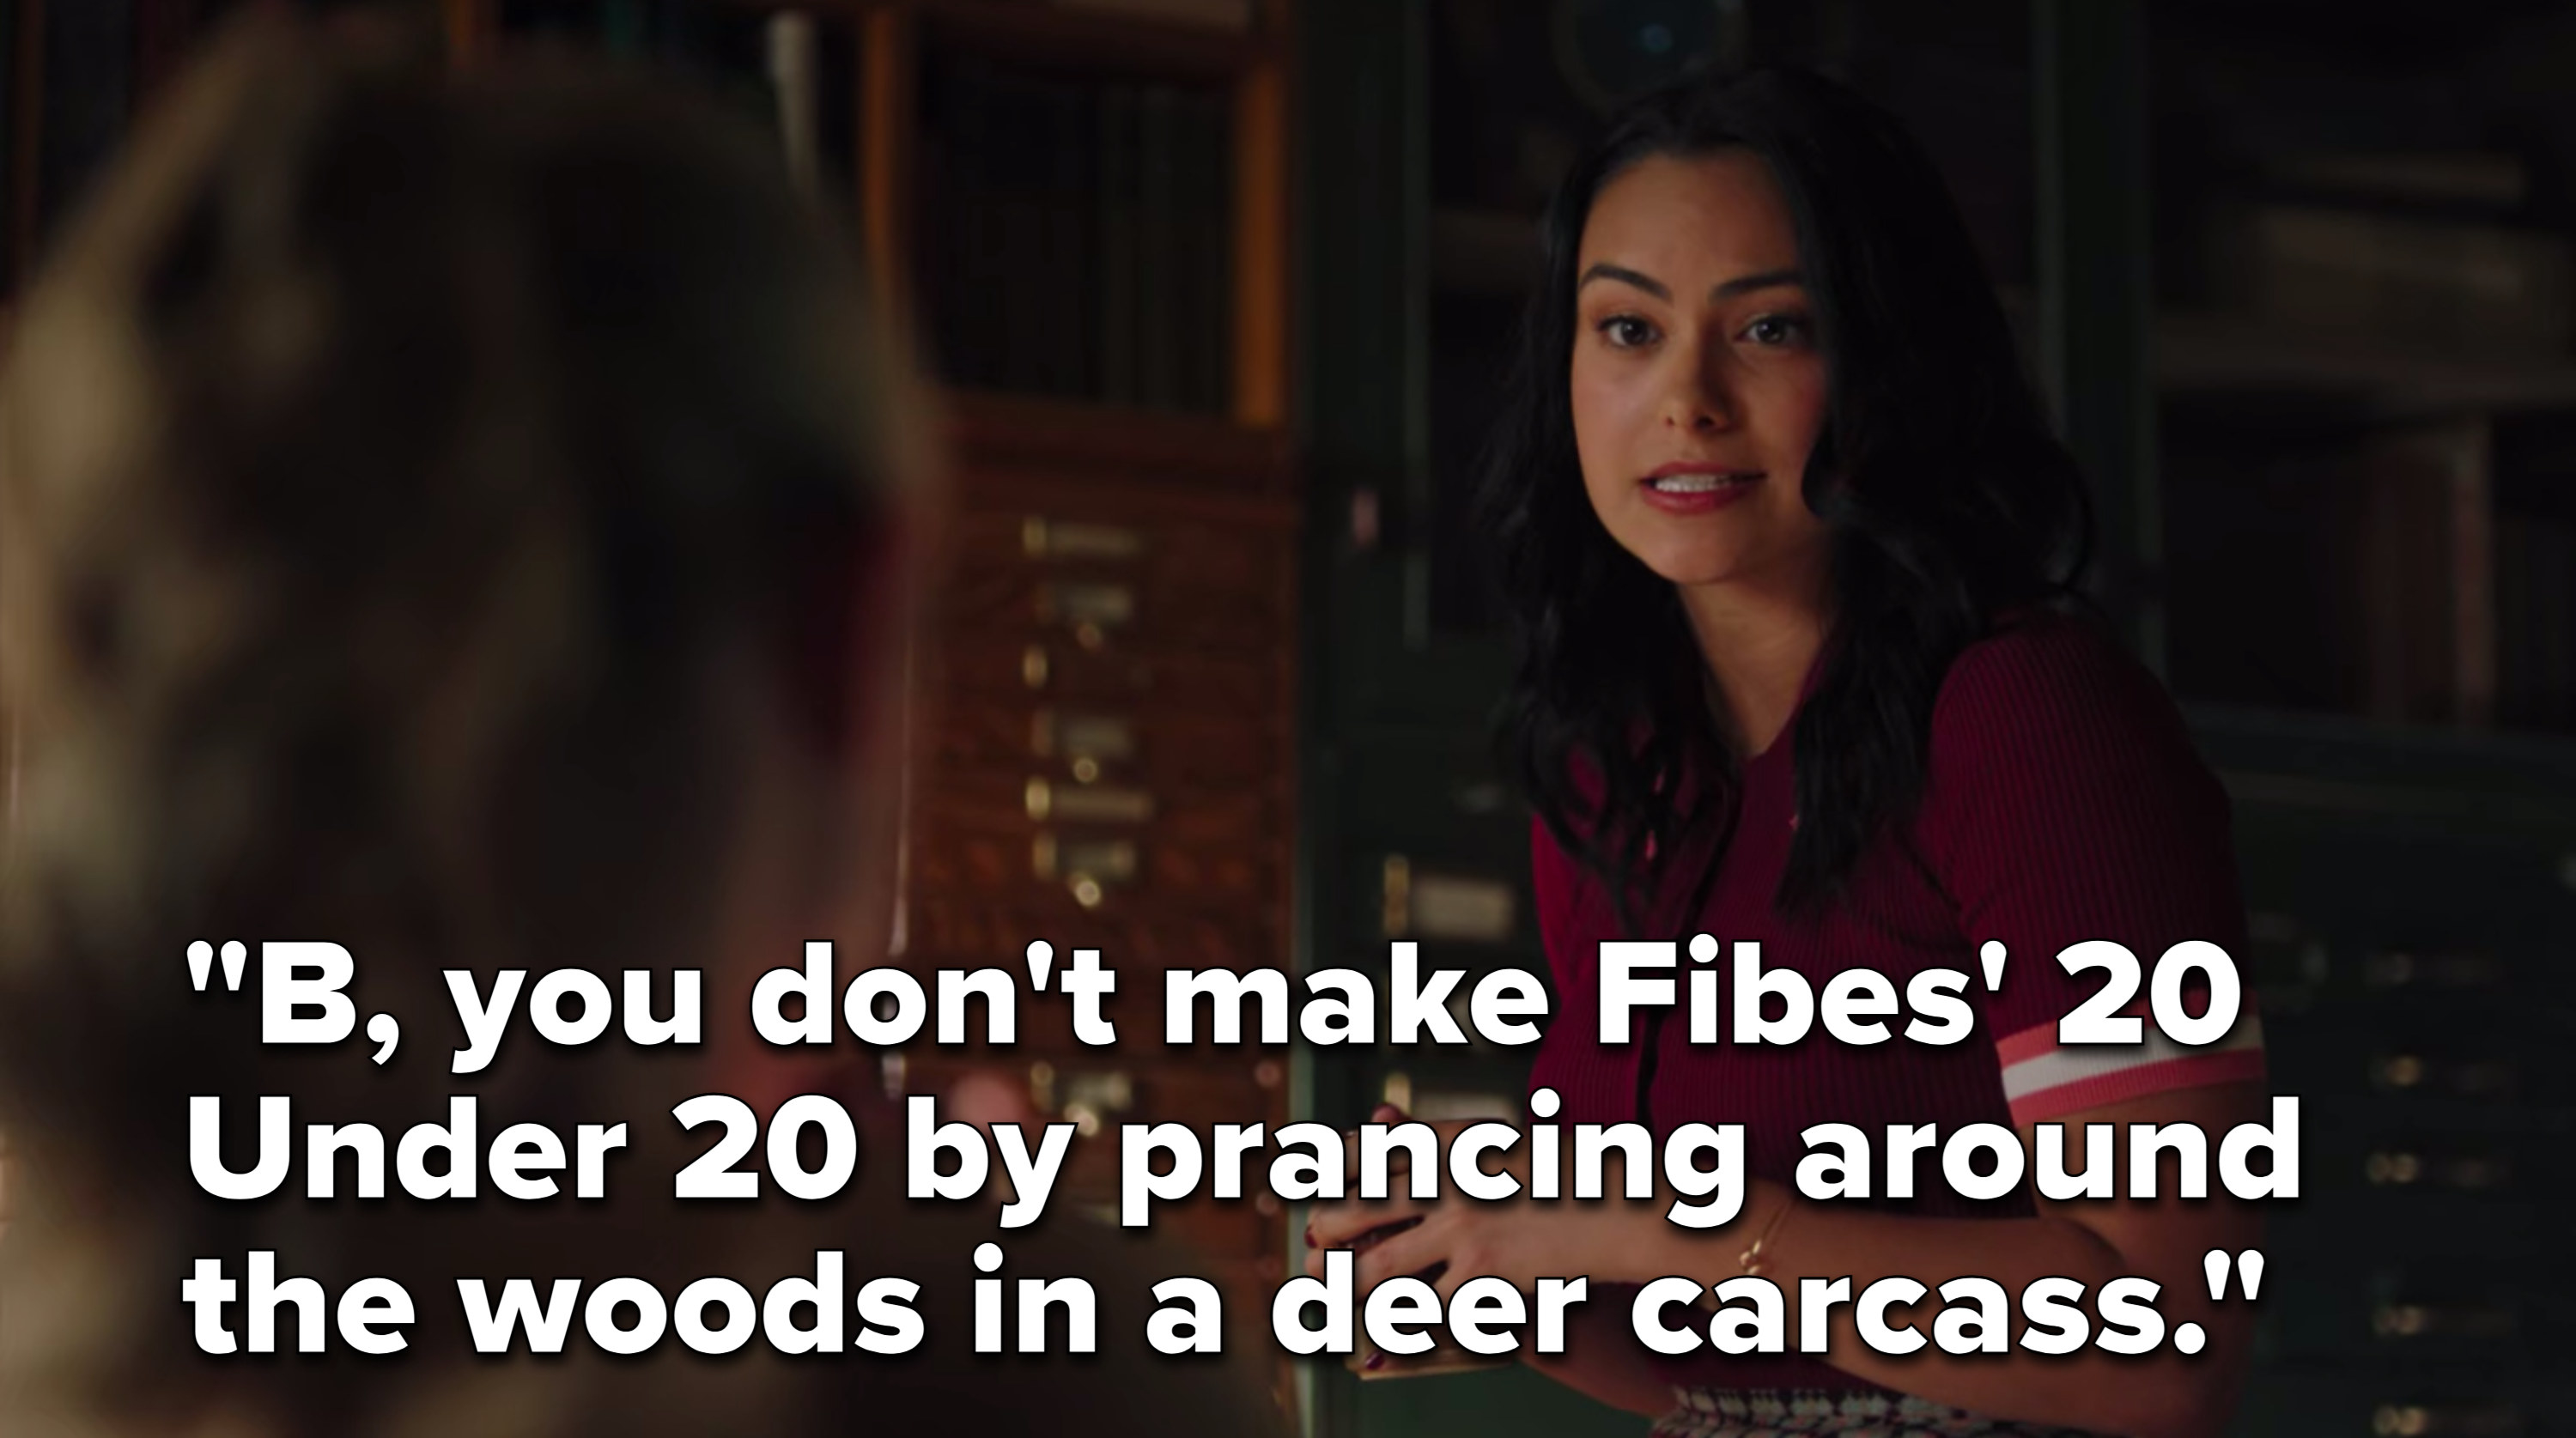 Veronica says, &quot;B, you don&#x27;t make Fibes 20 Under 20 by prancing around the woods in a deer carcass&quot;